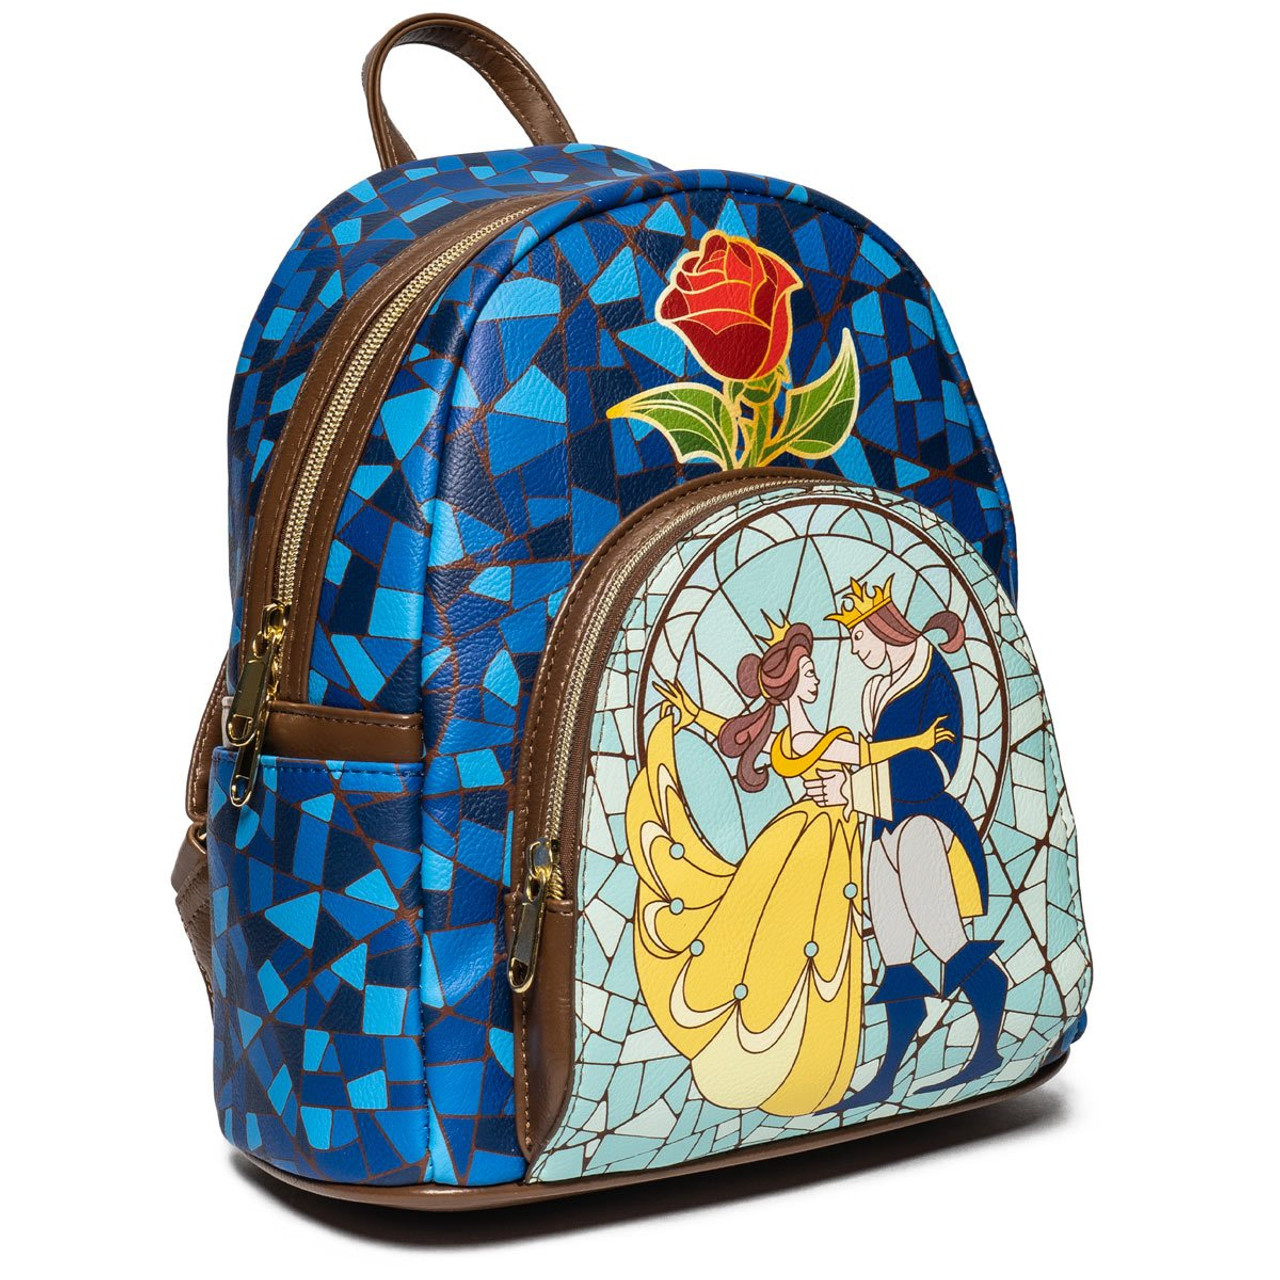 Beauty and the Beast Library Scene LoungeFly Mini-Backpack